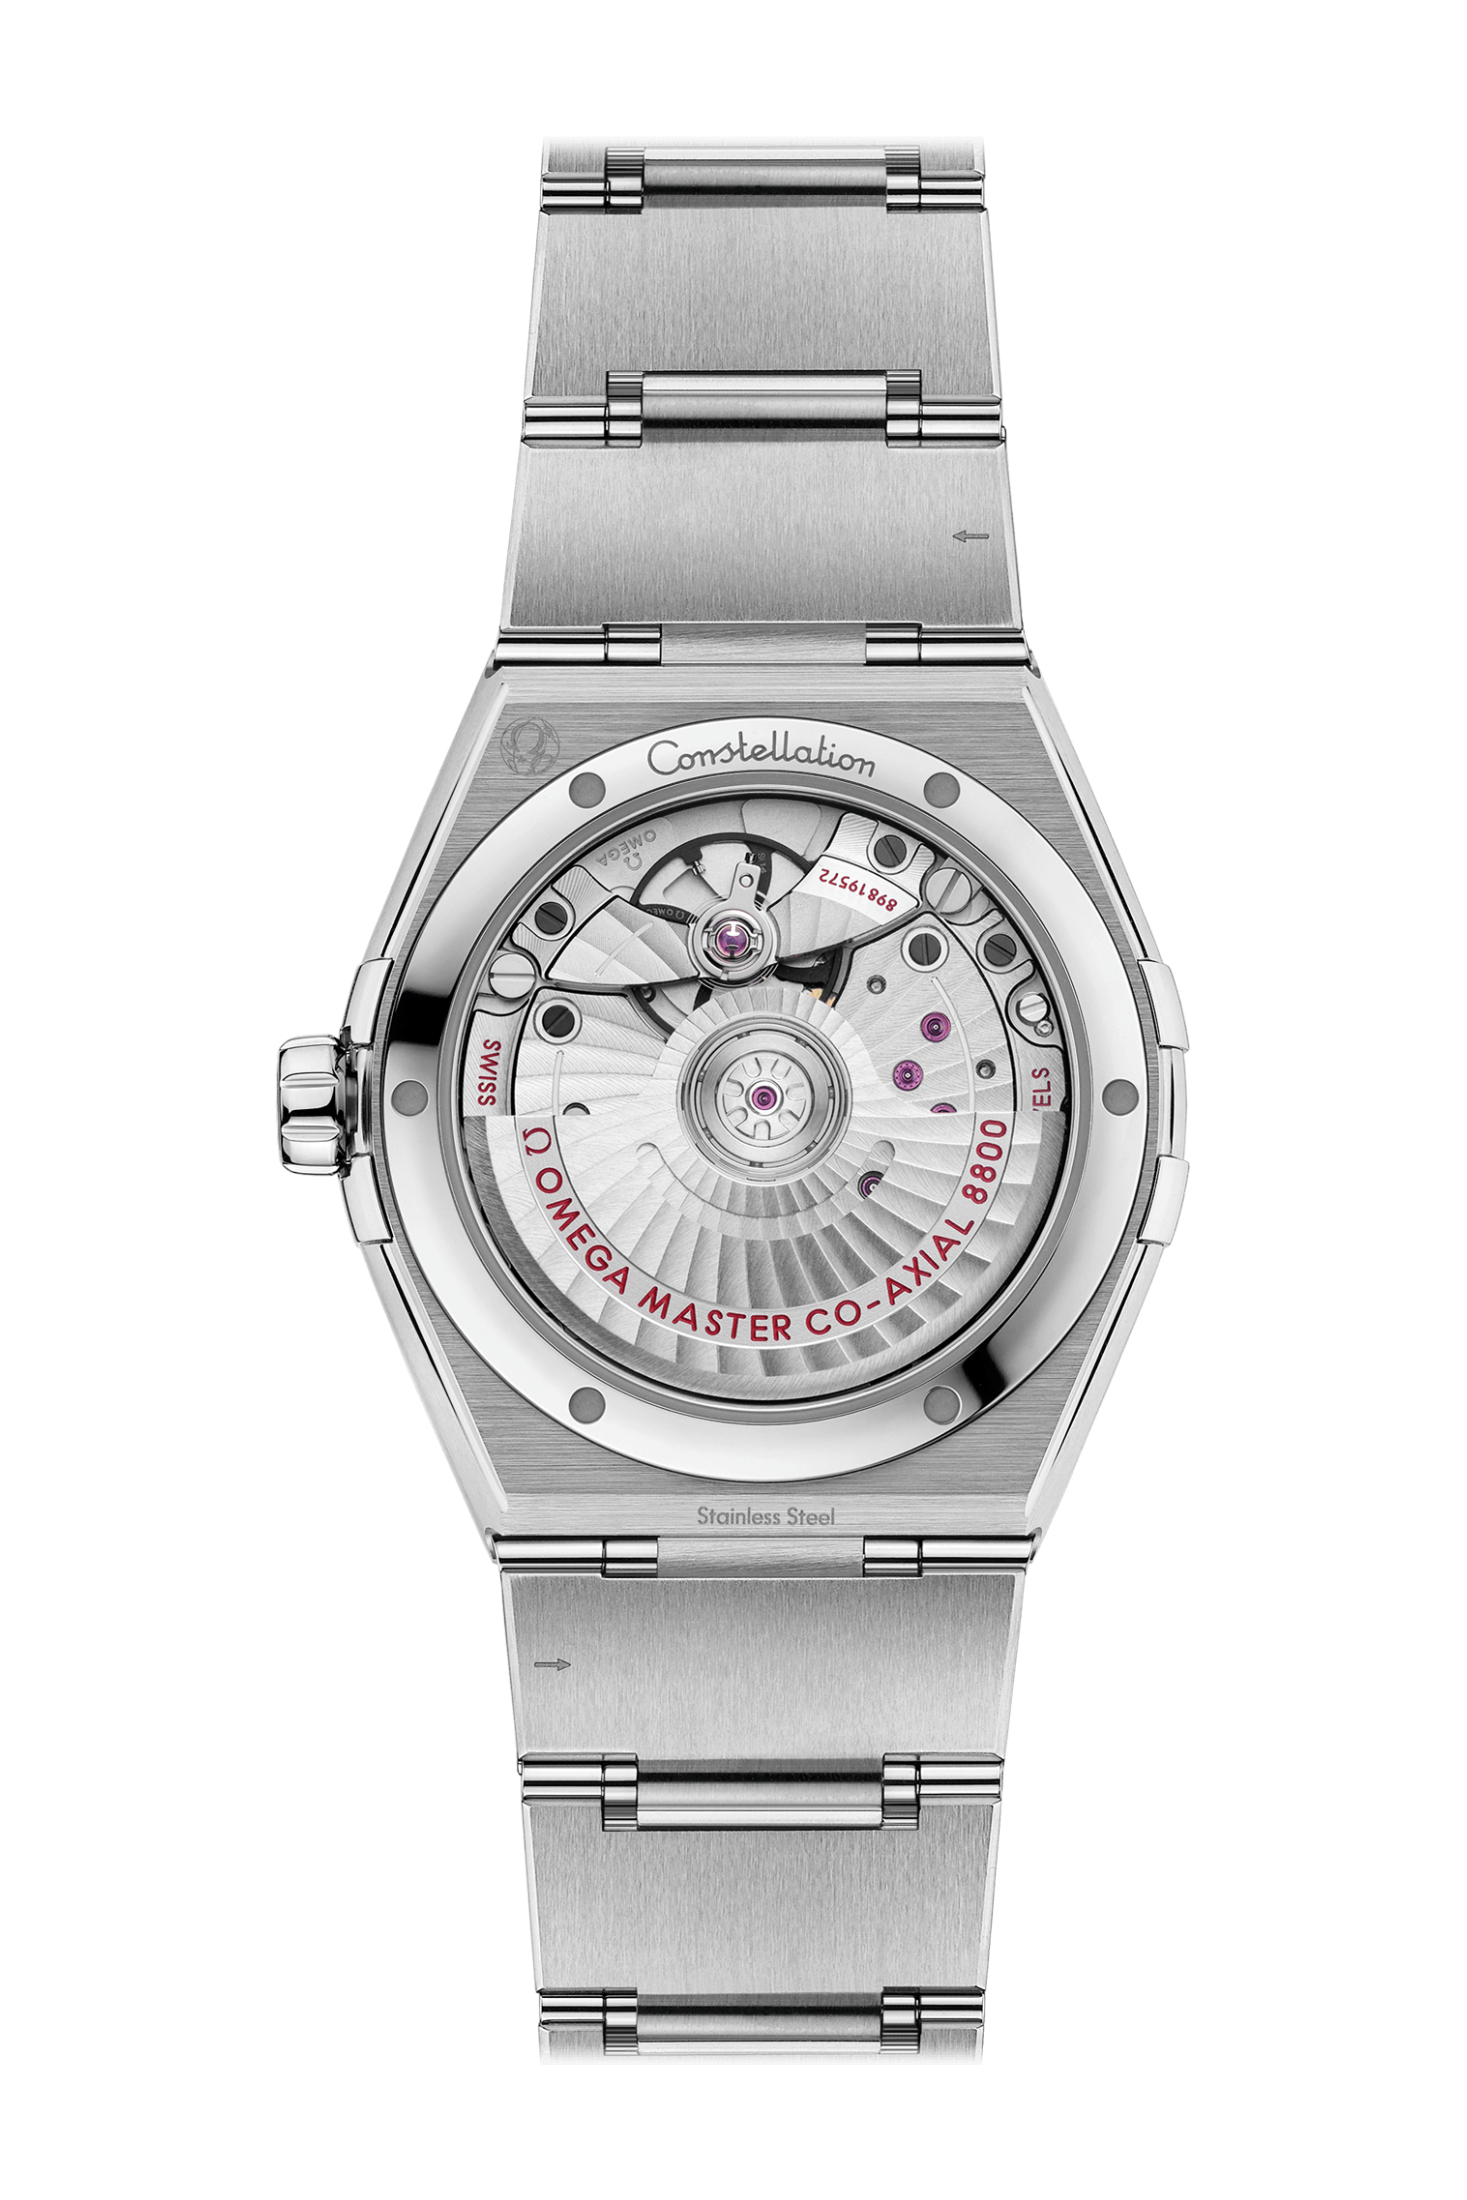 Ladies' watch  OMEGA, Constellation Co Axial Master Chronometer / 36mm, SKU: 131.10.36.20.02.001 | watchapproach.com